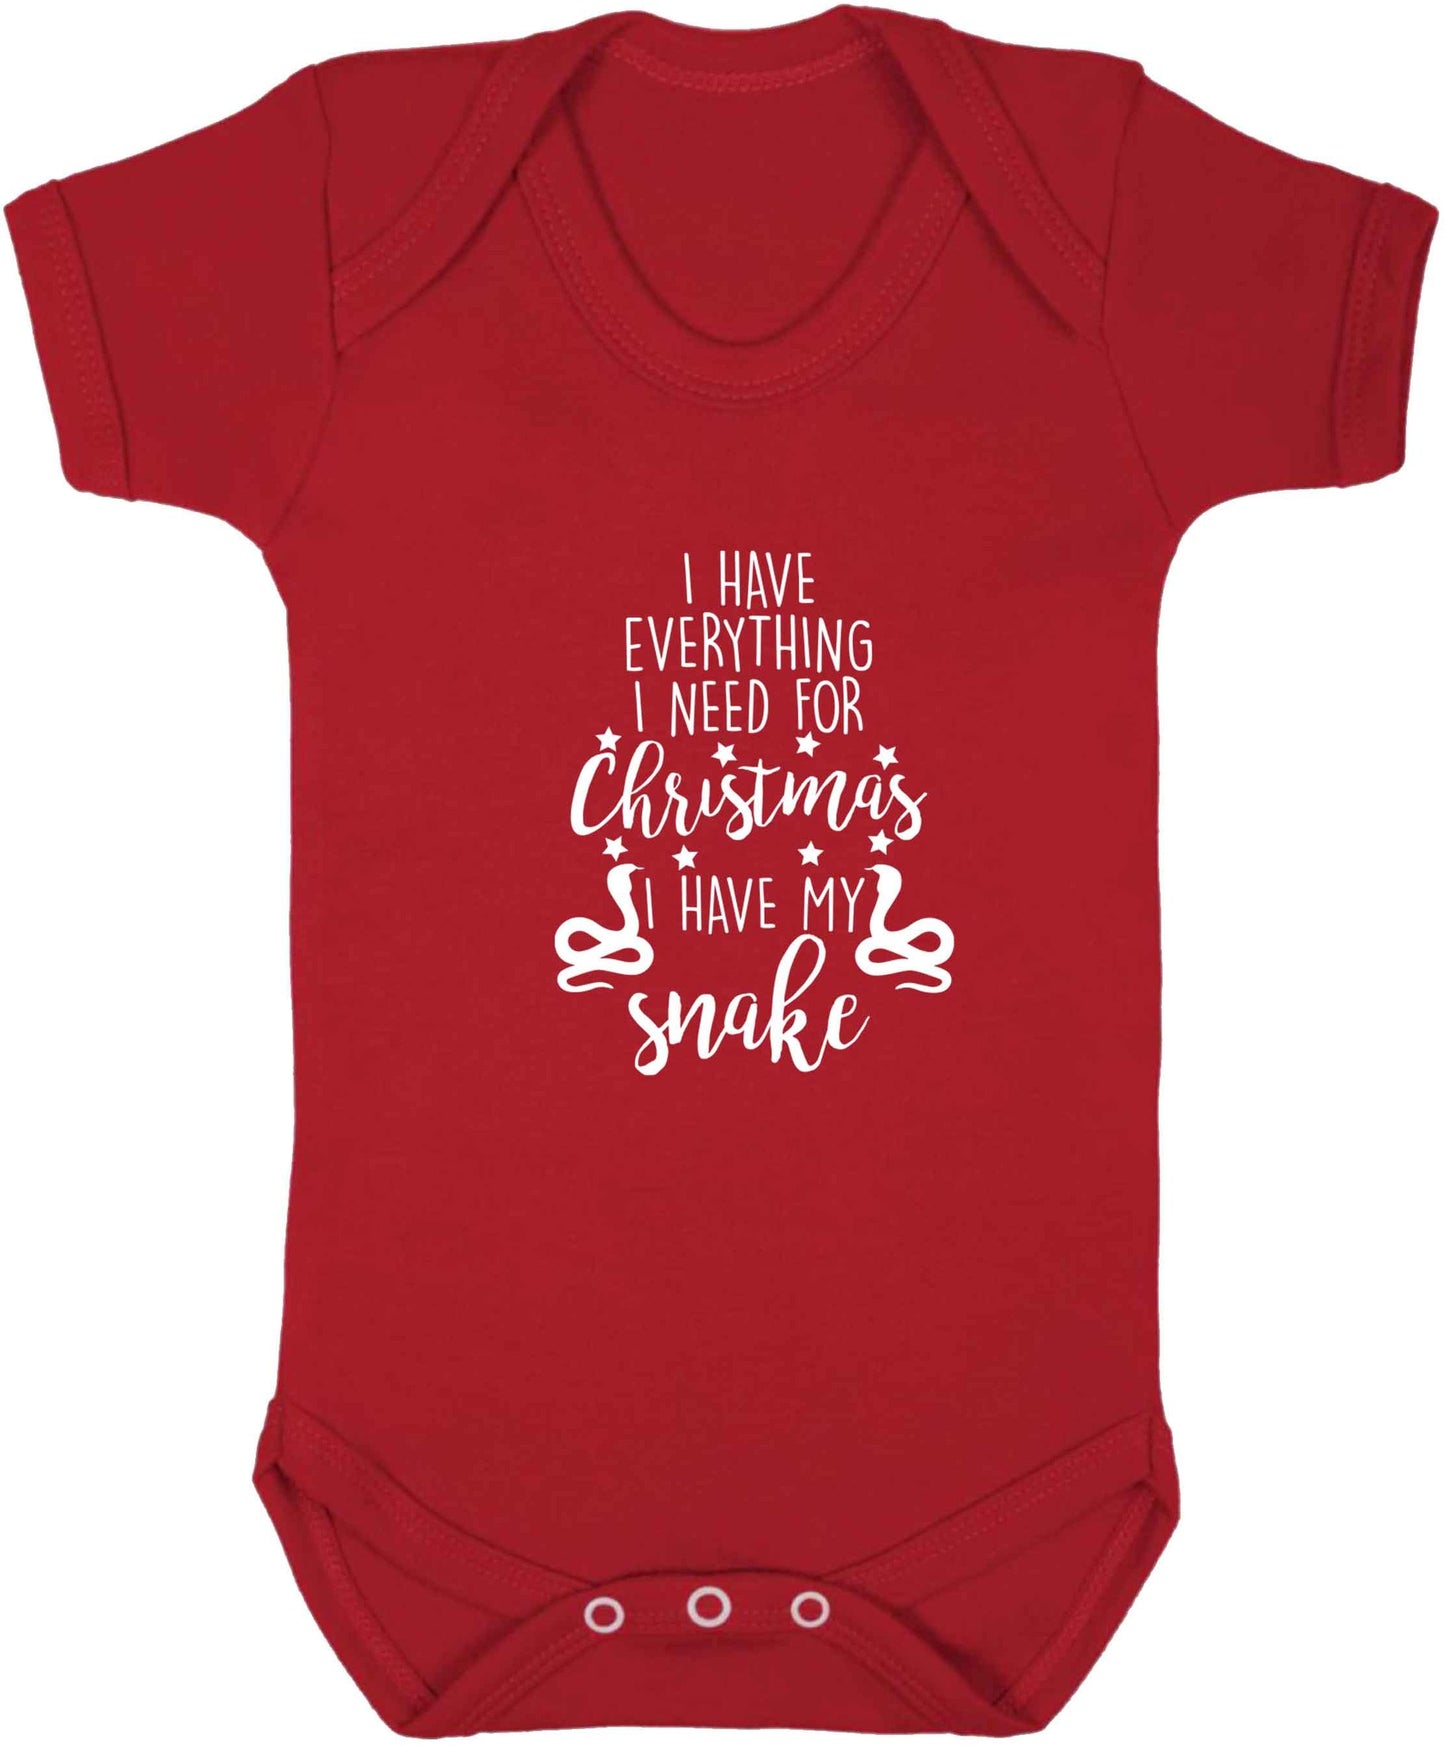 I have everything I need for Christmas I have my snake baby vest red 18-24 months